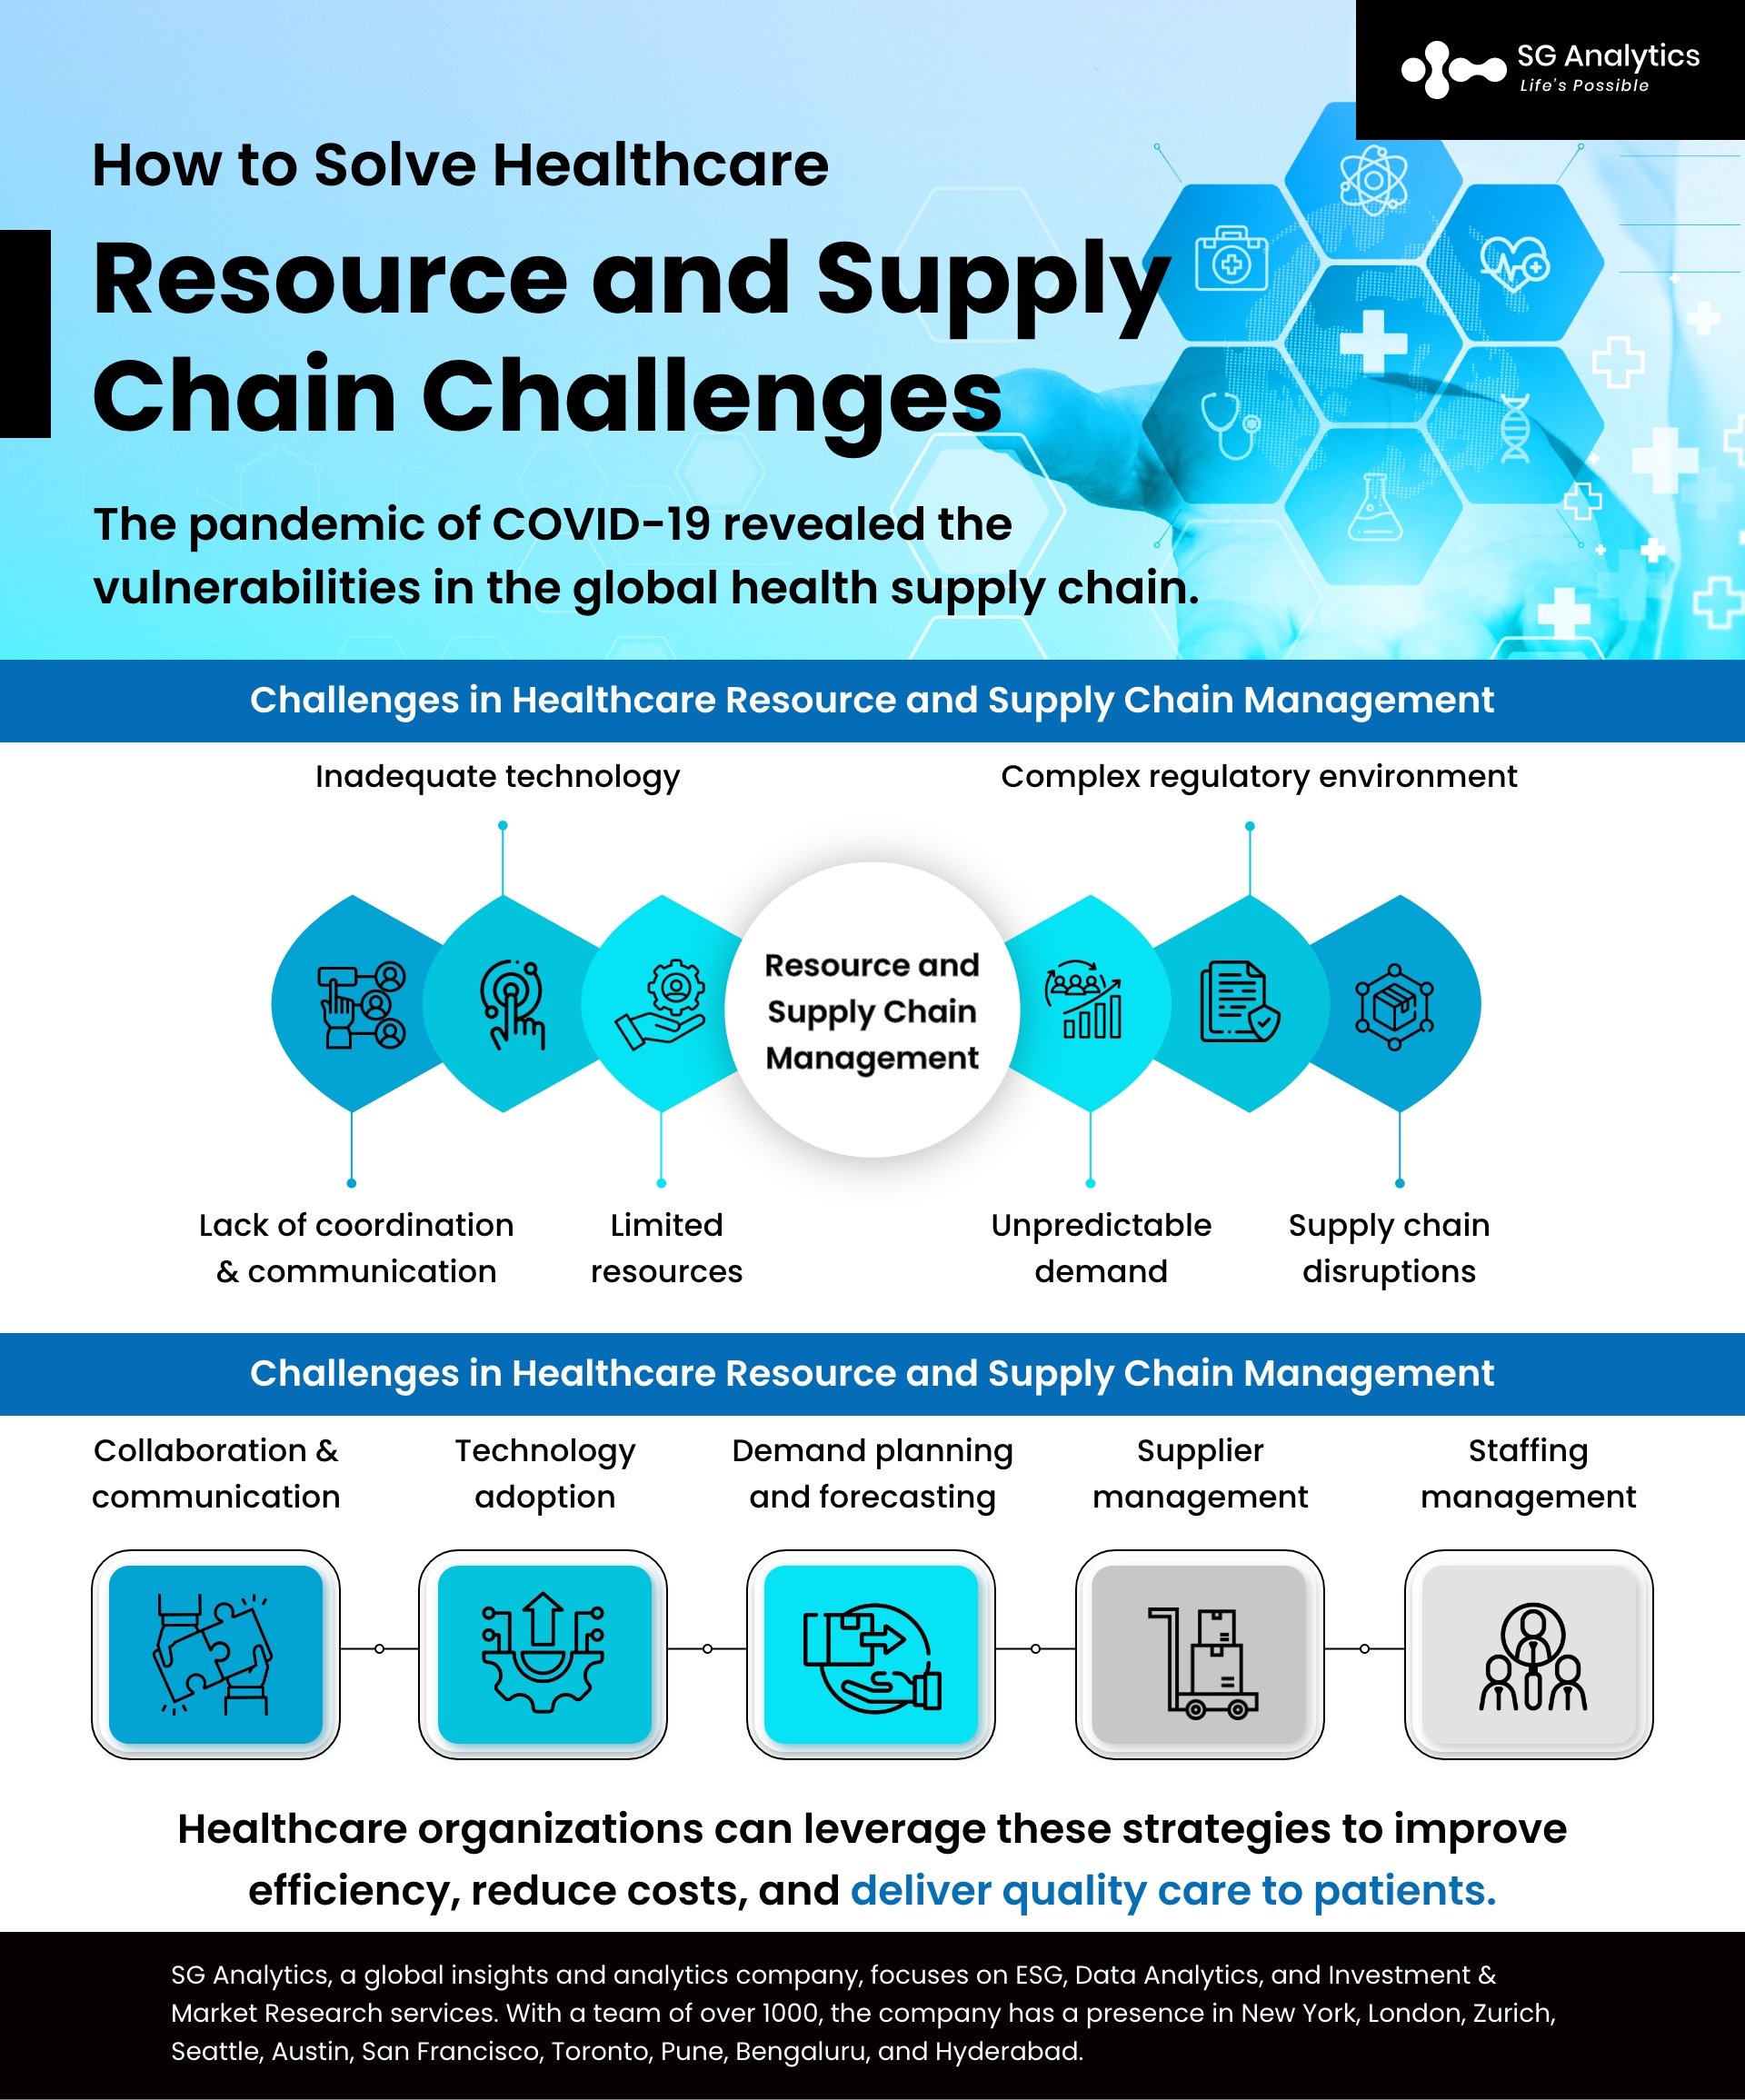 How to Solve Healthcare Resource and Supply Chain Challenges